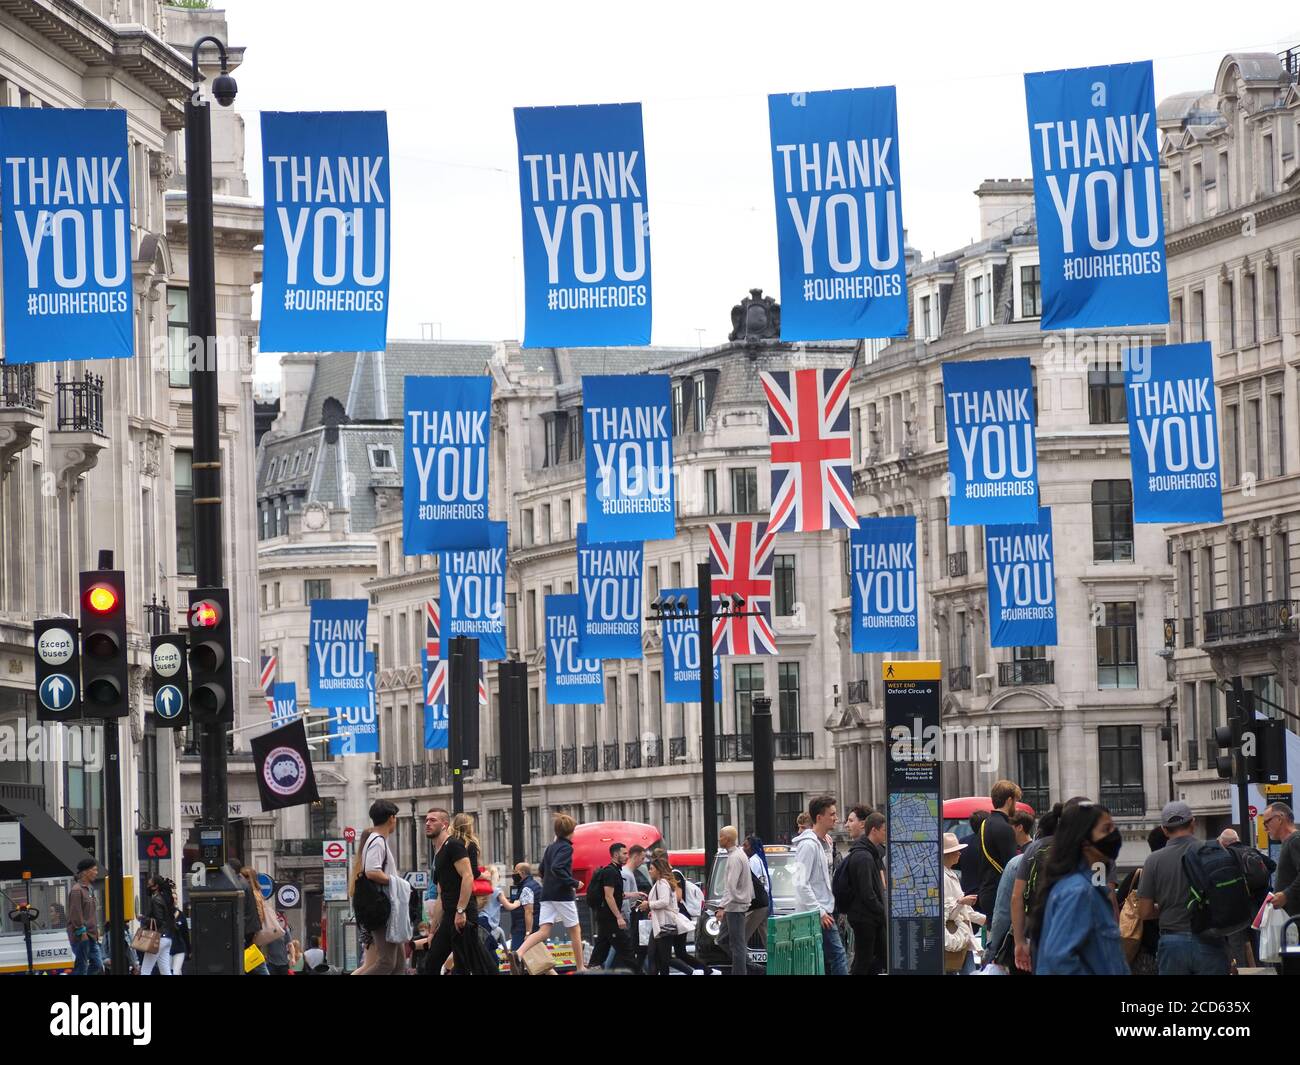 View looking along lines of many flags hanging above Regent Street in London thanking our heroes during the Covid 19 pandemic in 2020 Stock Photo